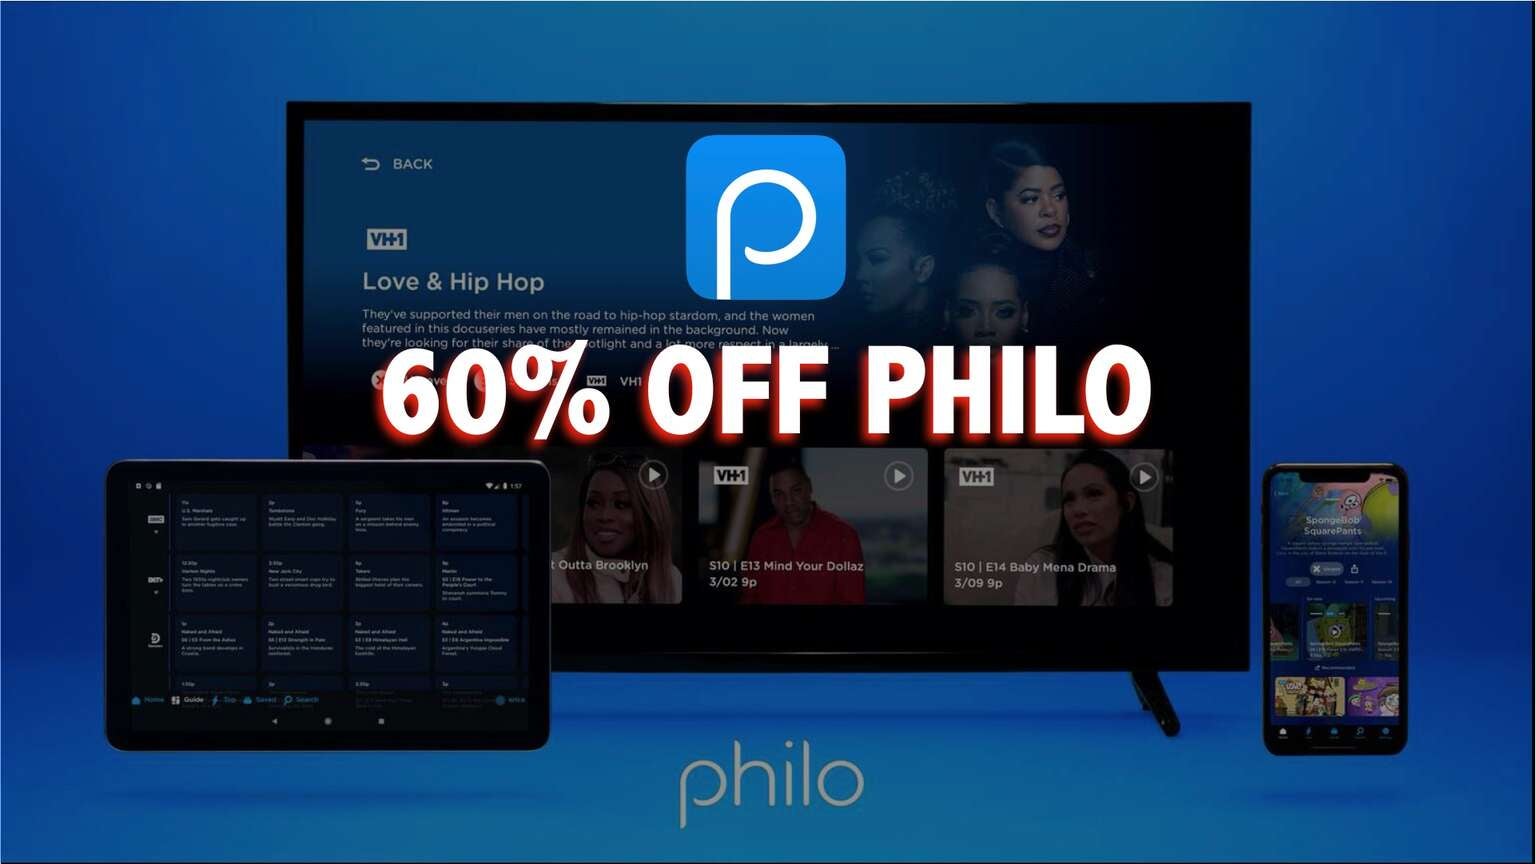 LAST CHANCE Get Your First Month of Philo For ONLY 10 (60 OFF), with